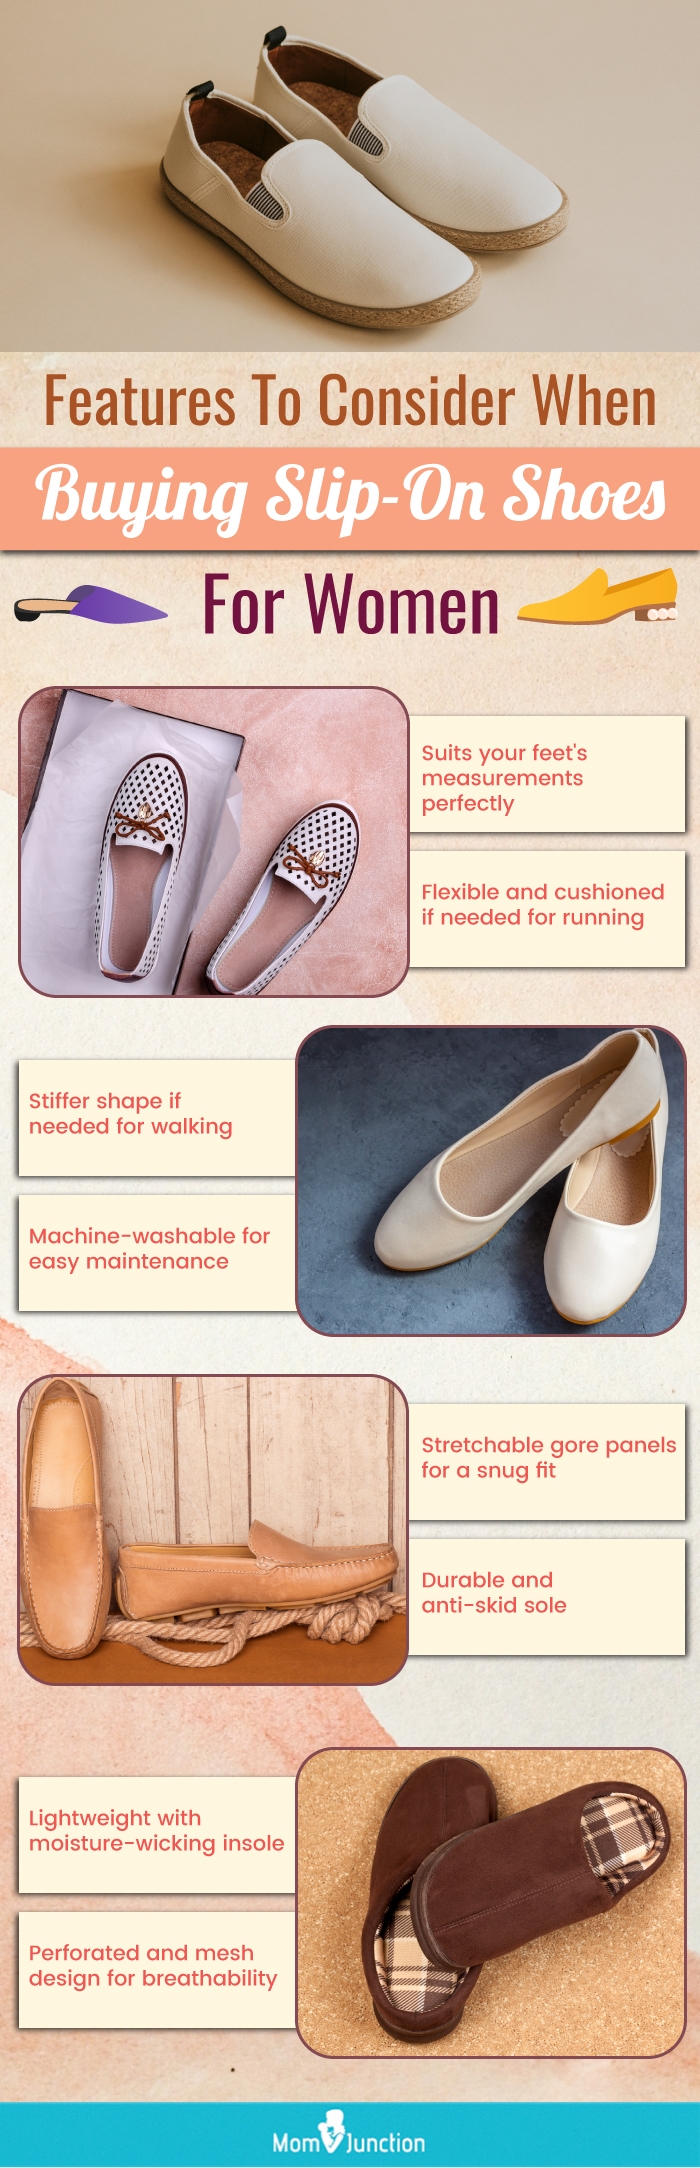 Features To Consider When Buying Slip On Shoes For Women (infographic)